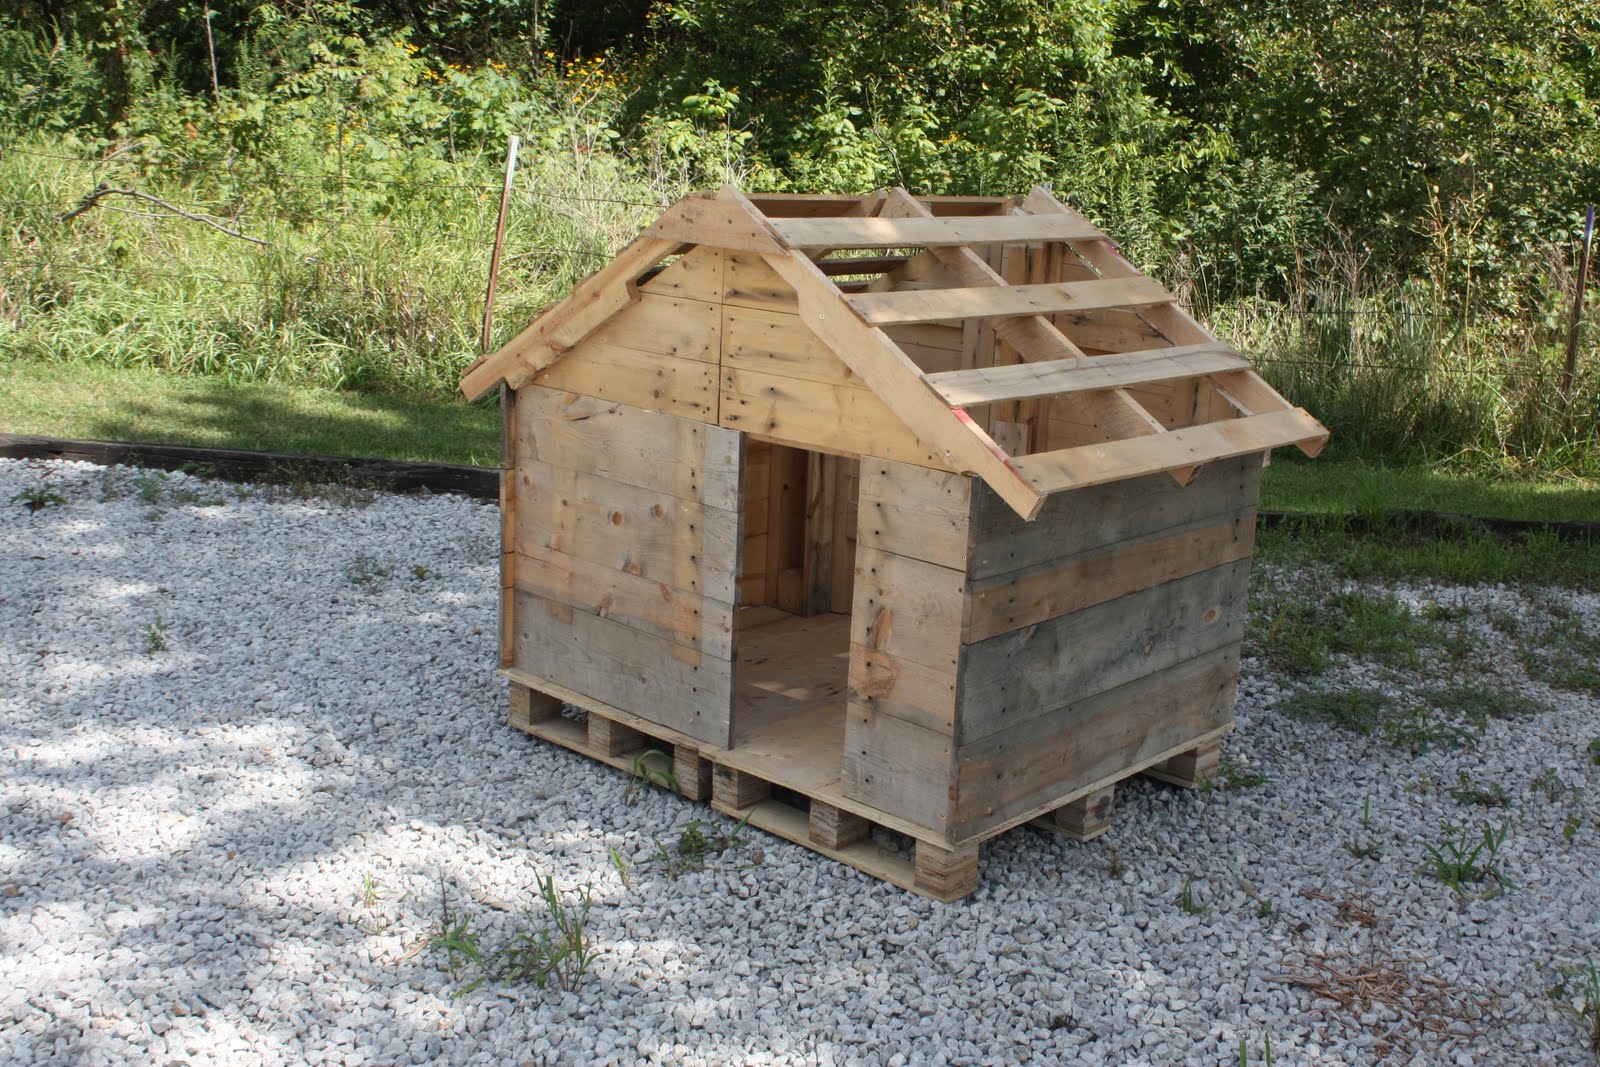 Barefoot outside: New Doghouse!